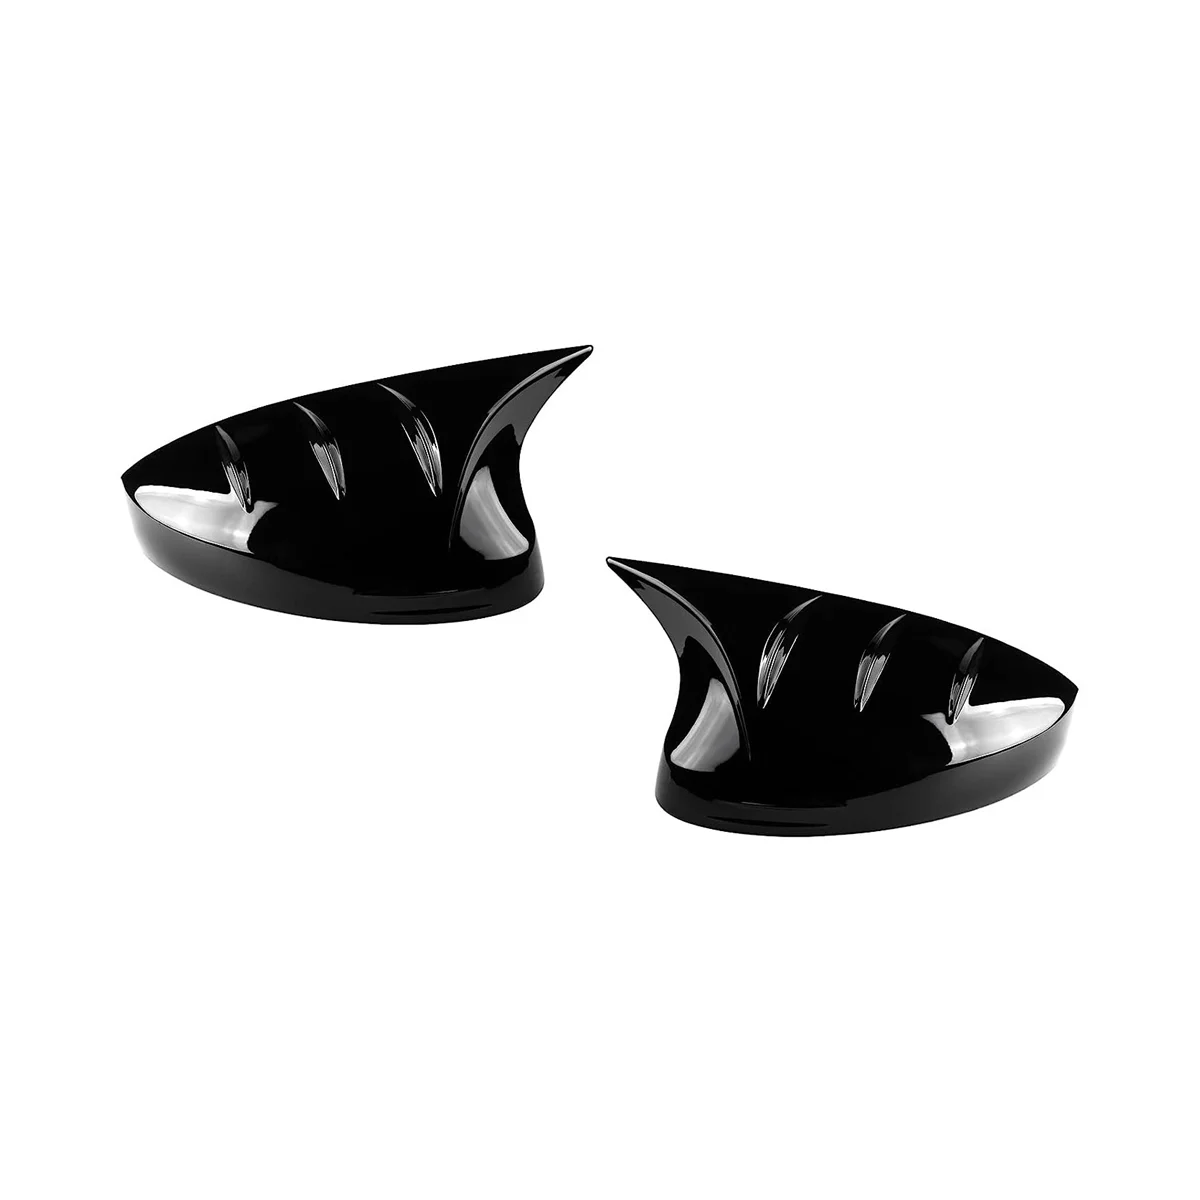 

For Honda Civic 11Th Gen 2022 2023 Rearview Mirror Cover Horns Side Rear View Mirror Caps Trim - ABS Black